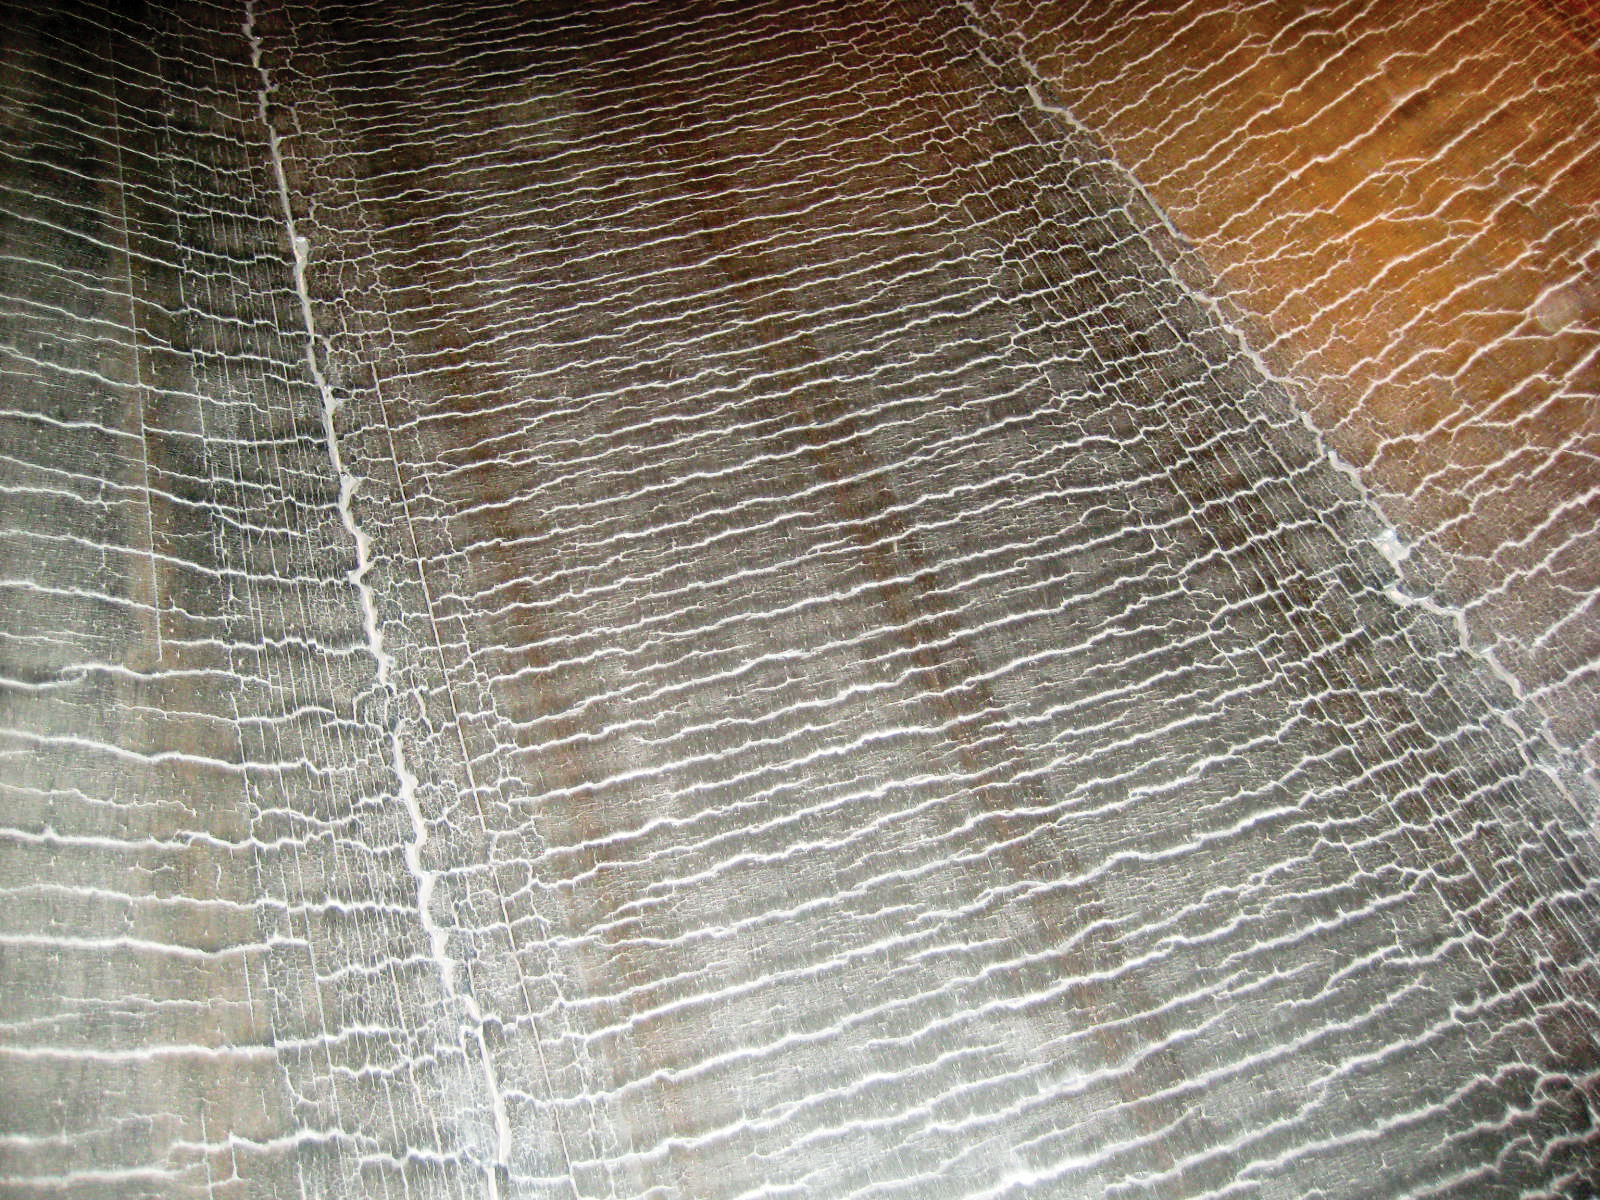 A close-up view of the top cover shows cracks throughout.